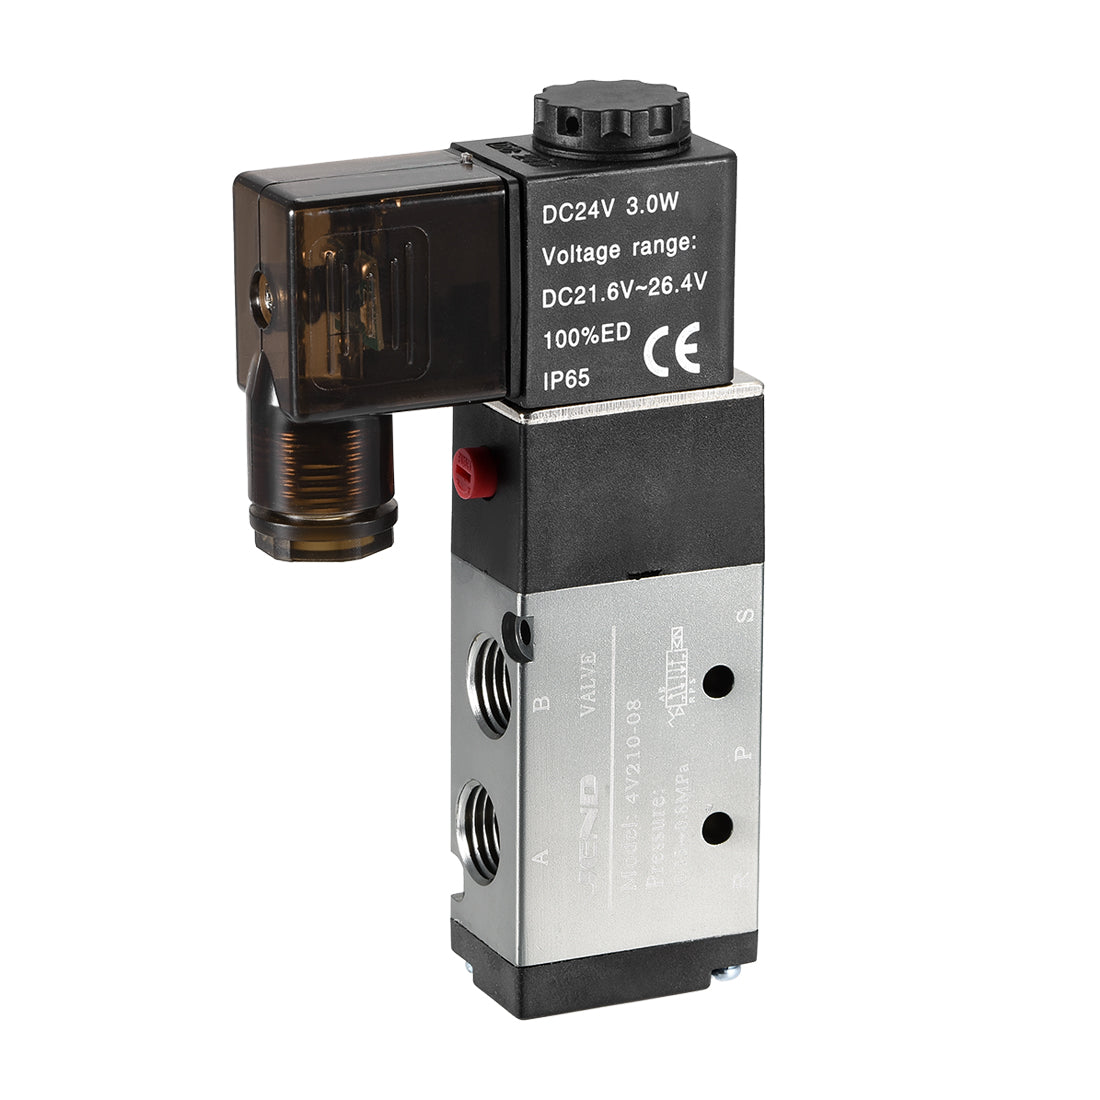 uxcell Uxcell 4V210-08 Pneumatic Air Electrical Control Solenoid Valve DC 24V 5 Way 2 Position 1/4" PT Internally Single Piloted Acting Type